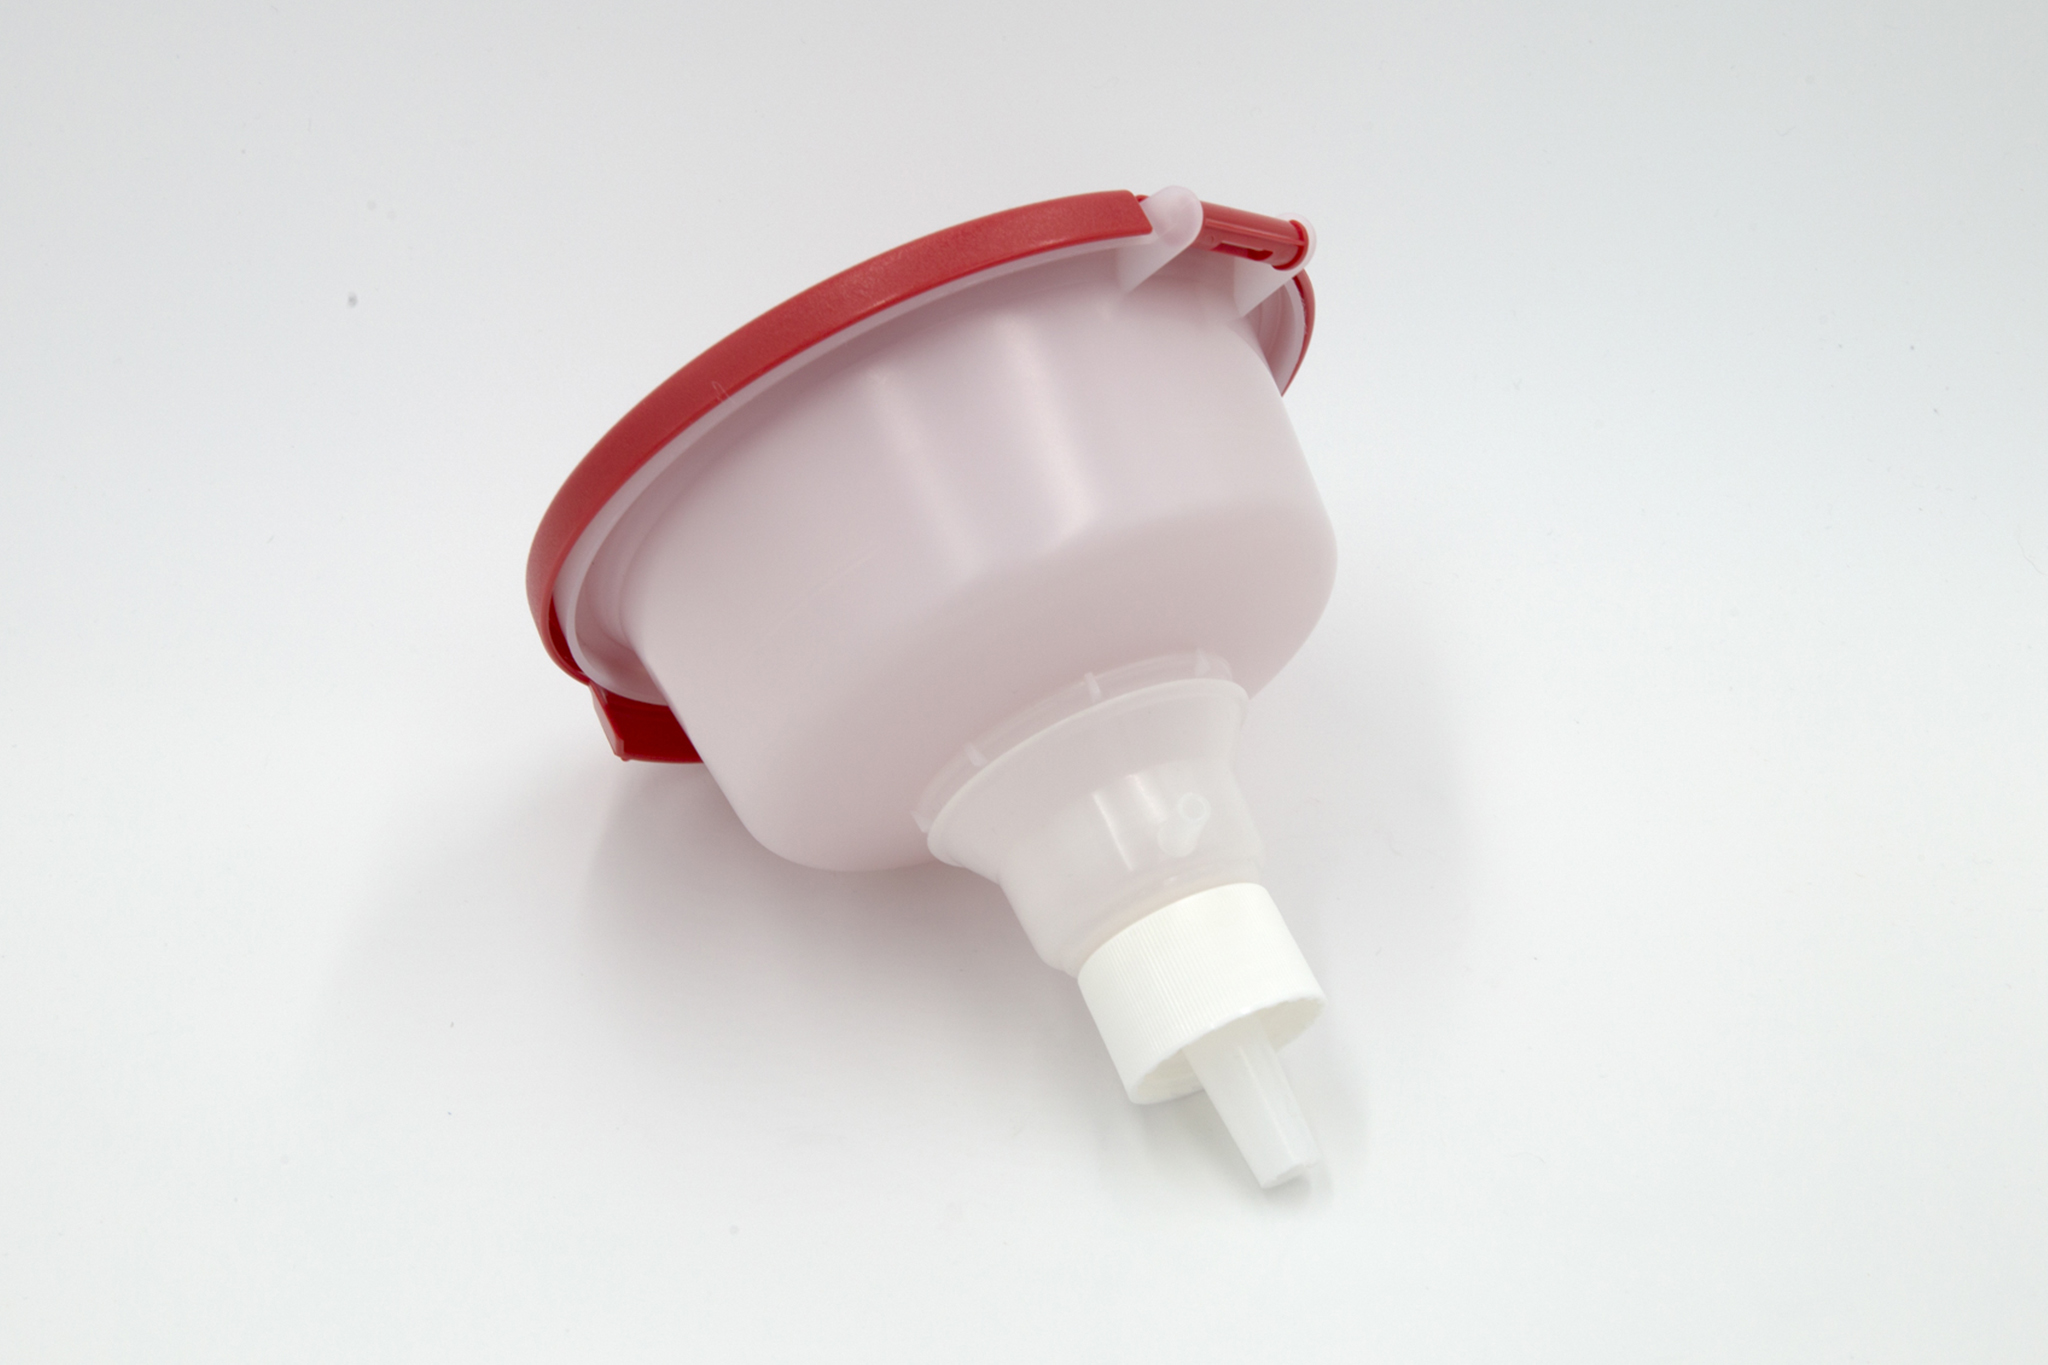 Red plastic funnel on a white background